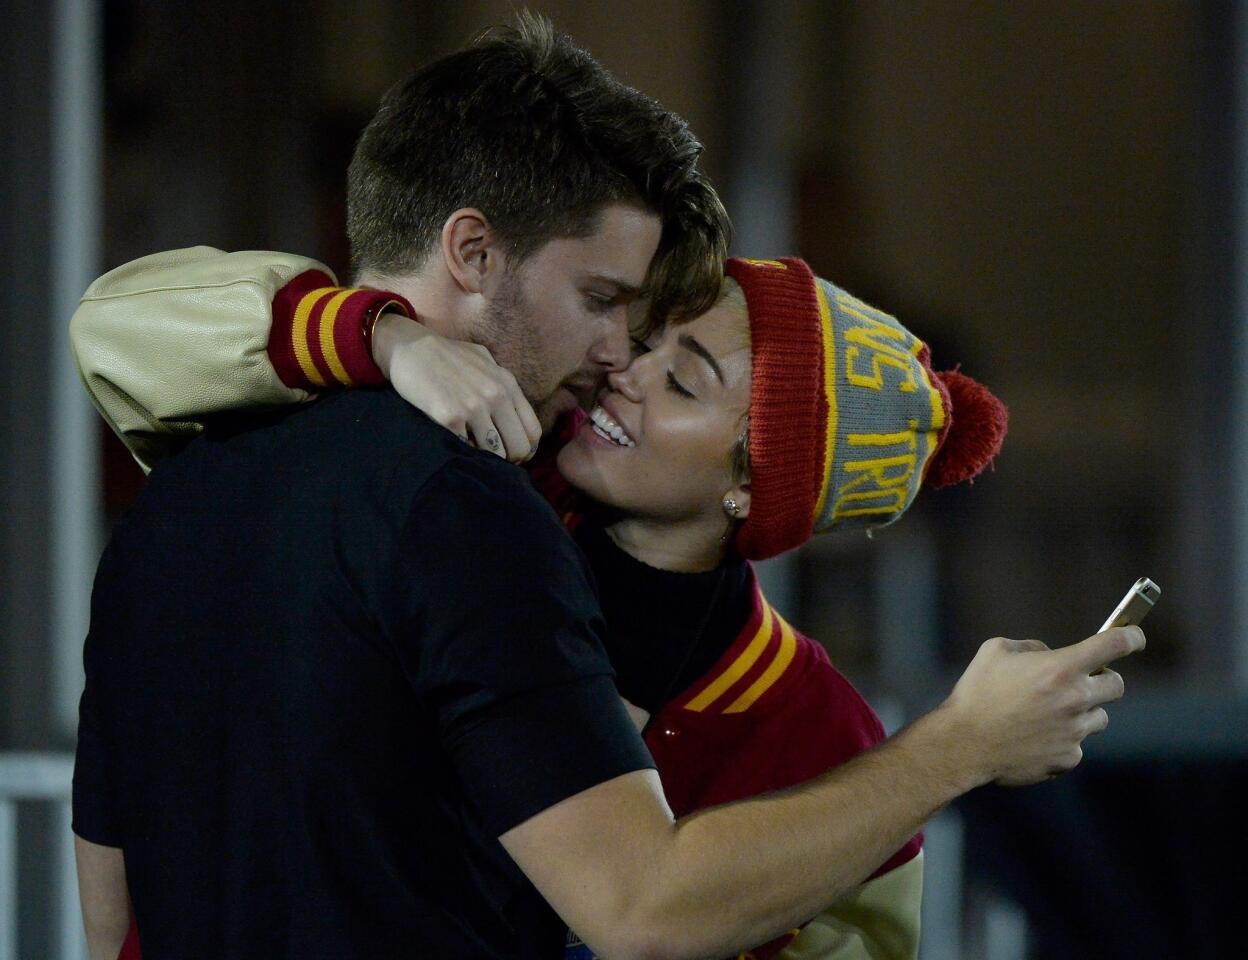 Patrick Schwarzenegger and Miley Cyrus made headlines when they engaged in some PDA during the USC Trojans' 38-30 victory over UC Berkeley at the L.A. Memorial Coliseum on Nov. 13, 2014.